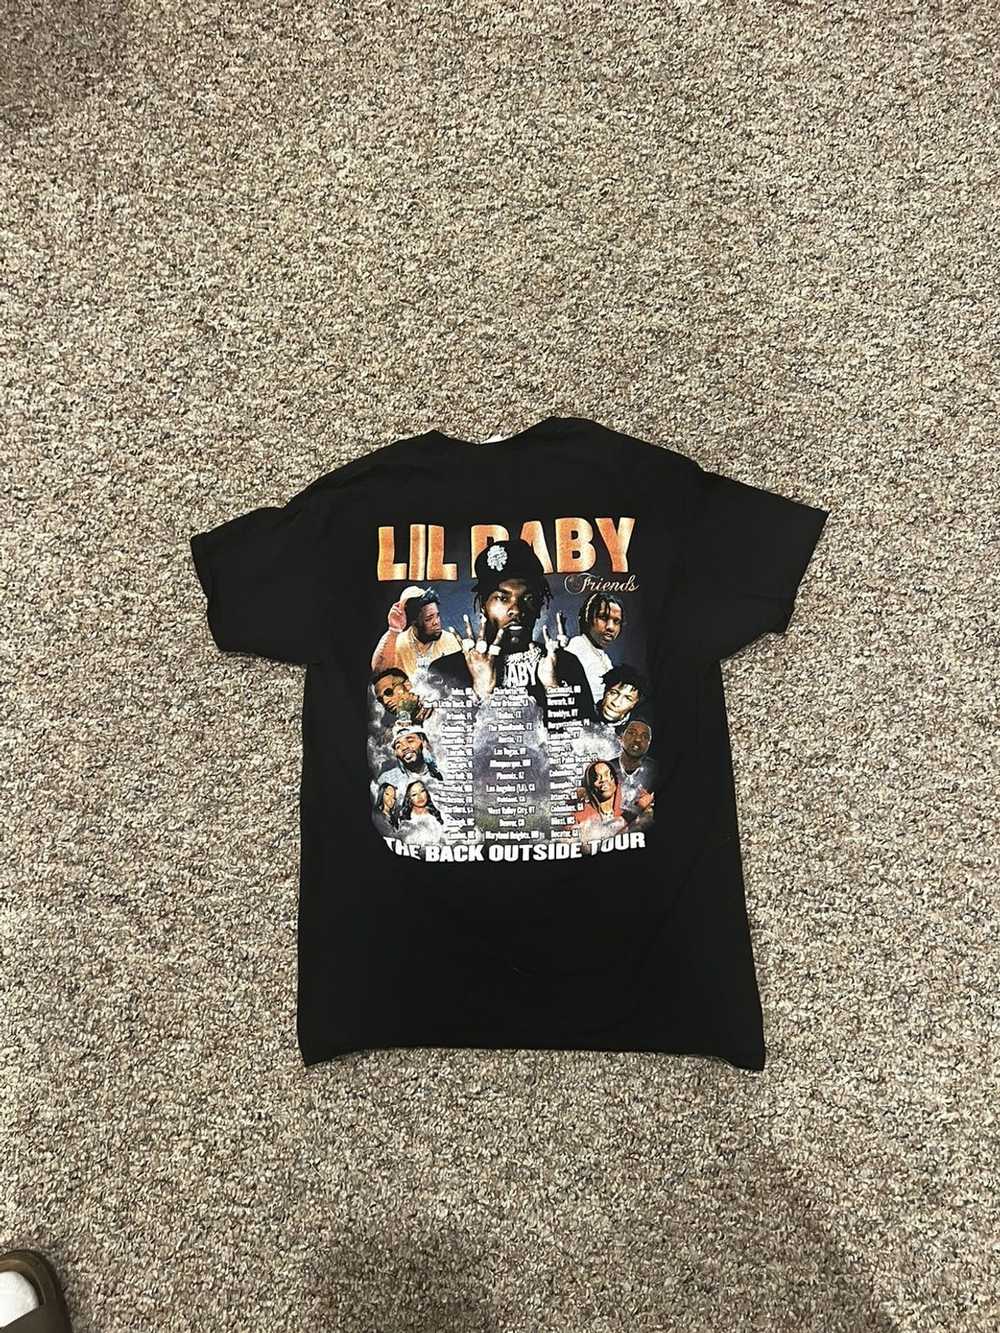 Other Lil Baby “Back Outside” Concert Tee - image 2